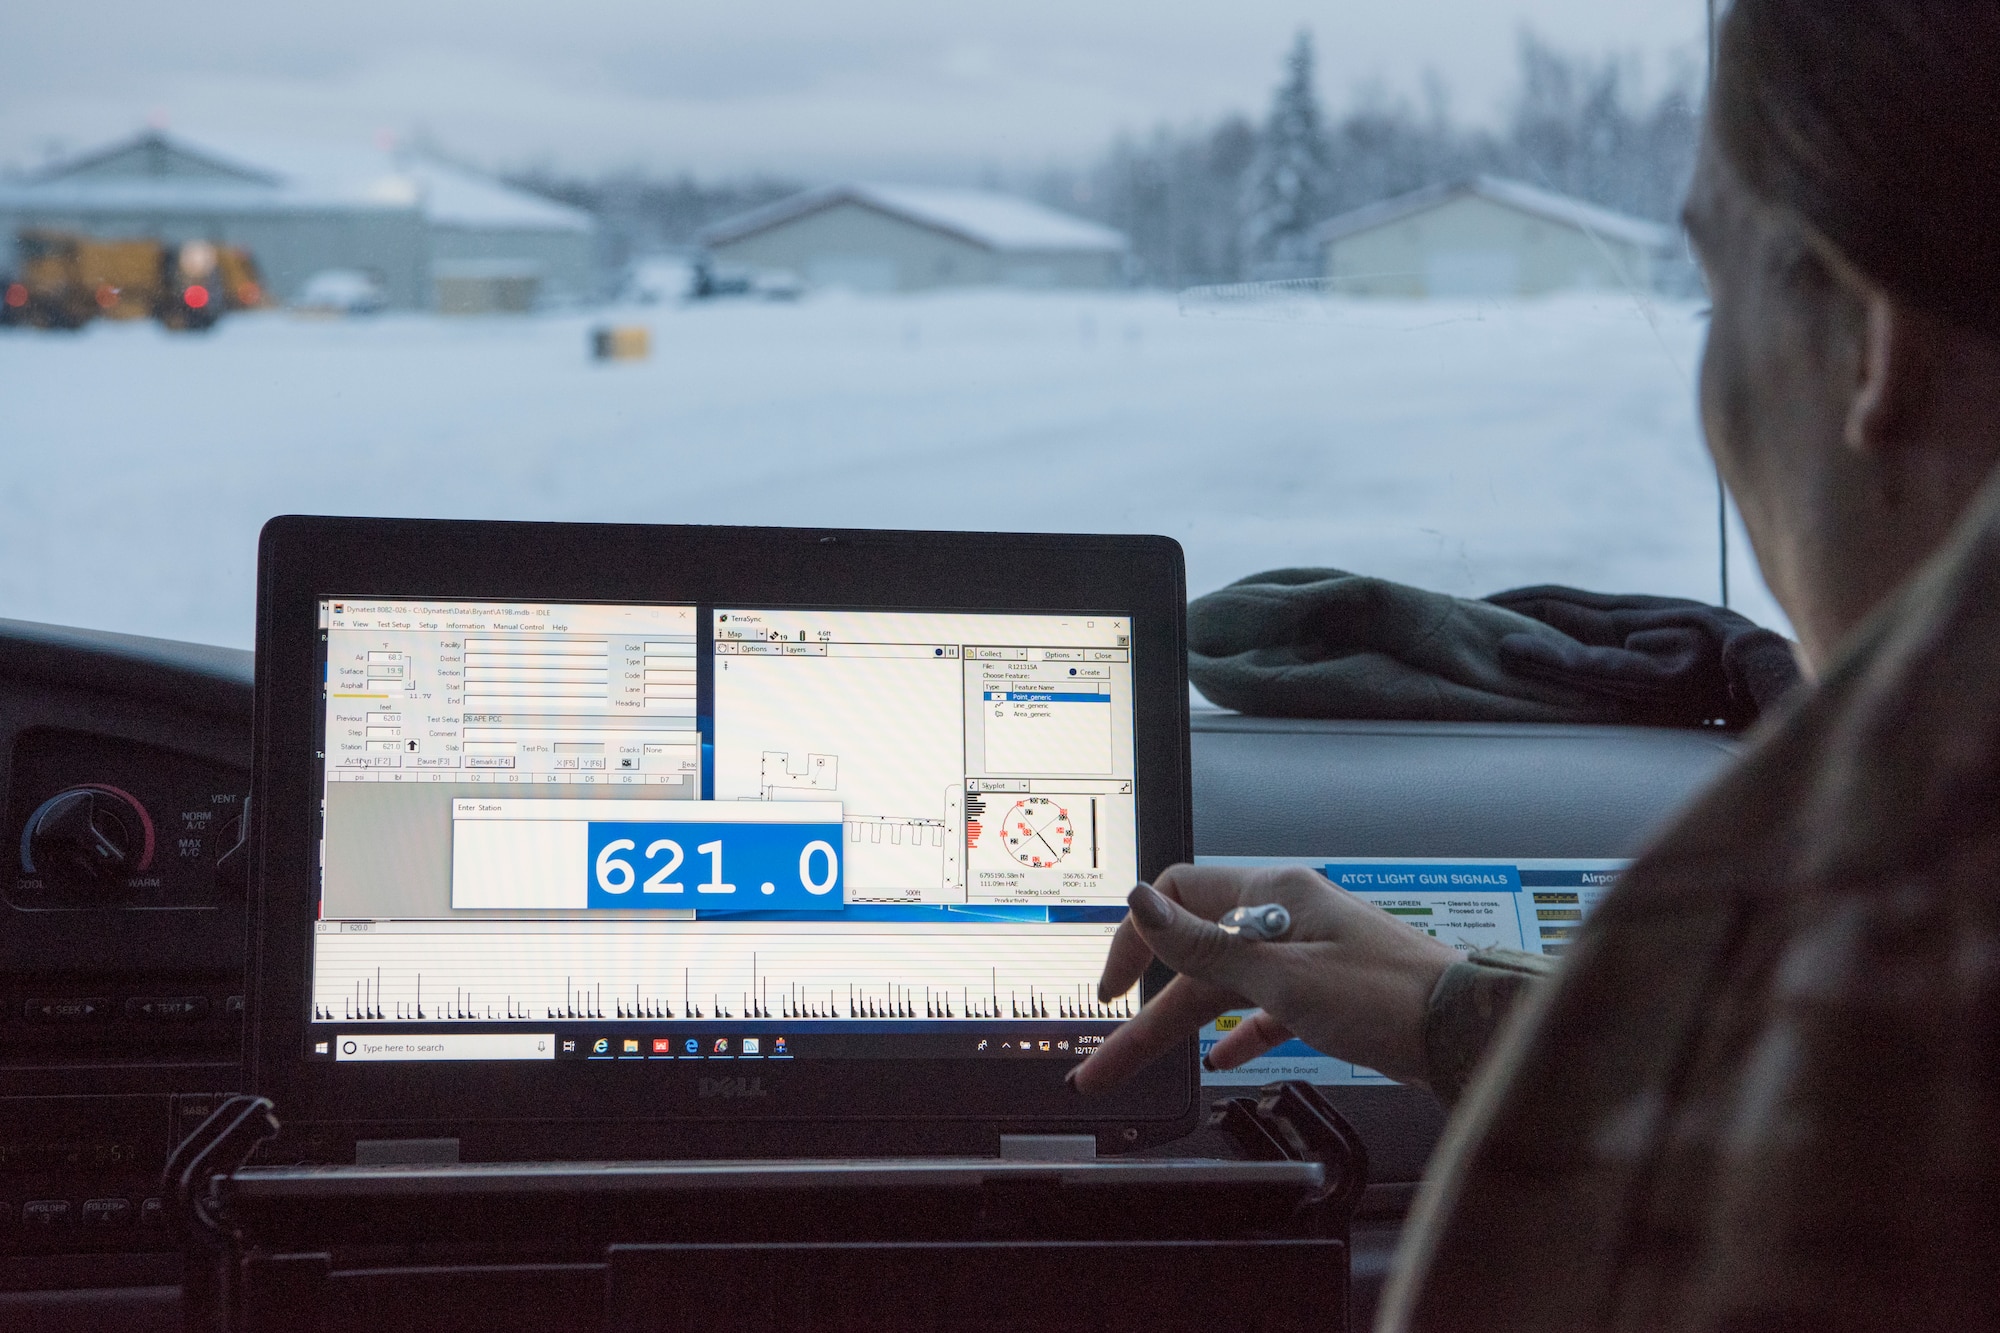 U.S. Air Force Master Sgt. Jill Reed, Air Force Civil Engineer Center’s Airfield Pavement Evaluation Team superintendent, uses Geographical information surveying software to test the structural capacity of the pavement during an evaluation of Bryant Army Airfield at Joint Base Elmendorf-Richardson, Alaska Dec. 17, 2018. A two-person team used non-destructive testing to assess potential non-visible pavement damage at all of JBER’s airfields following the Nov. 30, 7.0 magnitude earthquake, whose epicenter was located just north of the base. The deflectometer simulates 55,000 pounds of weight hitting the pavement at once. (U.S. Air Force photo by Airman 1st Class Crystal A. Jenkins)